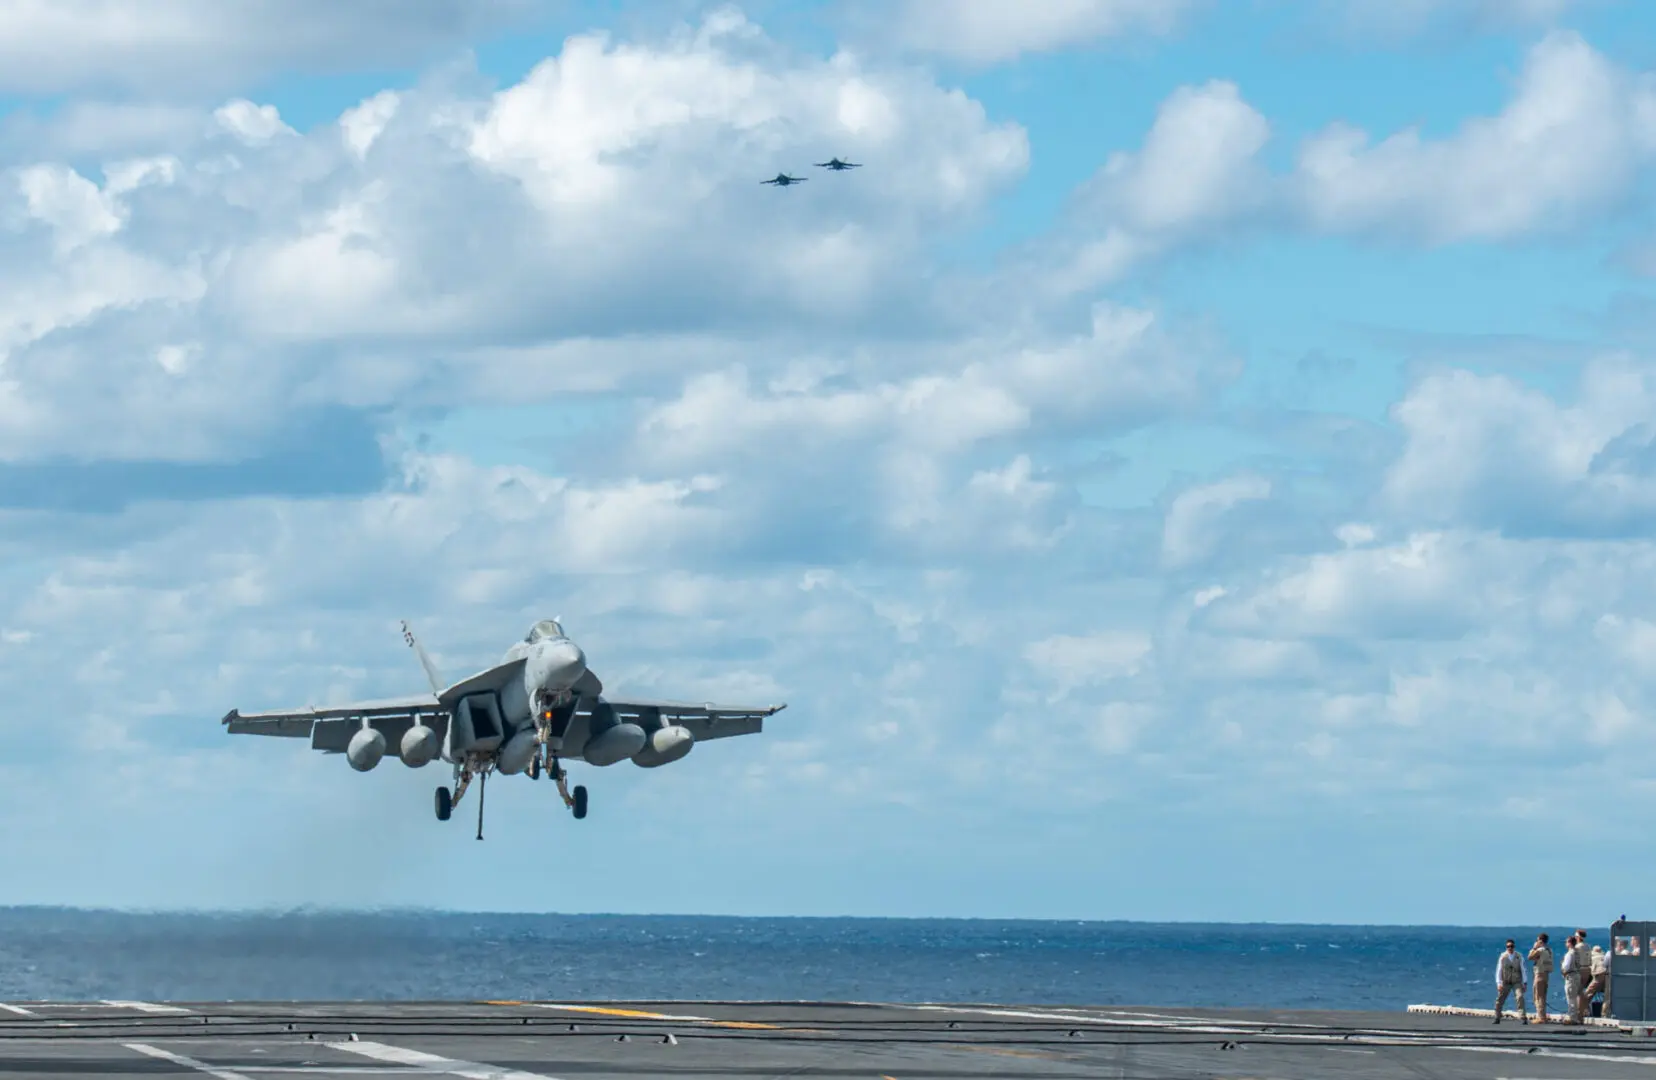 SEA OF JAPAN (Oct. 6, 2022) An F/A-18E Super Hornet, attached to the ÒRoyal MacesÓ of Strike Fighter Squadron (VFA) 27, lands on the flight deck of the U.S. NavyÕs only forward-deployed aircraft carrier, USS Ronald Reagan (CVN 76), in the Sea of Japan. The Royal Maces conduct carrier-based air strikes and strike force escort missions, as well as ship, battle group, and intelligence collection operations. Ronald Reagan, the flagship of Carrier Strike Group 5, provides a combat-ready force that protects and defends the United States, and supports alliances, partnerships and collective maritime interests in the Indo-Pacific region. (U.S. Navy Photo by Mass Communication Specialist 2nd Class Michael B. Jarmiolowski)